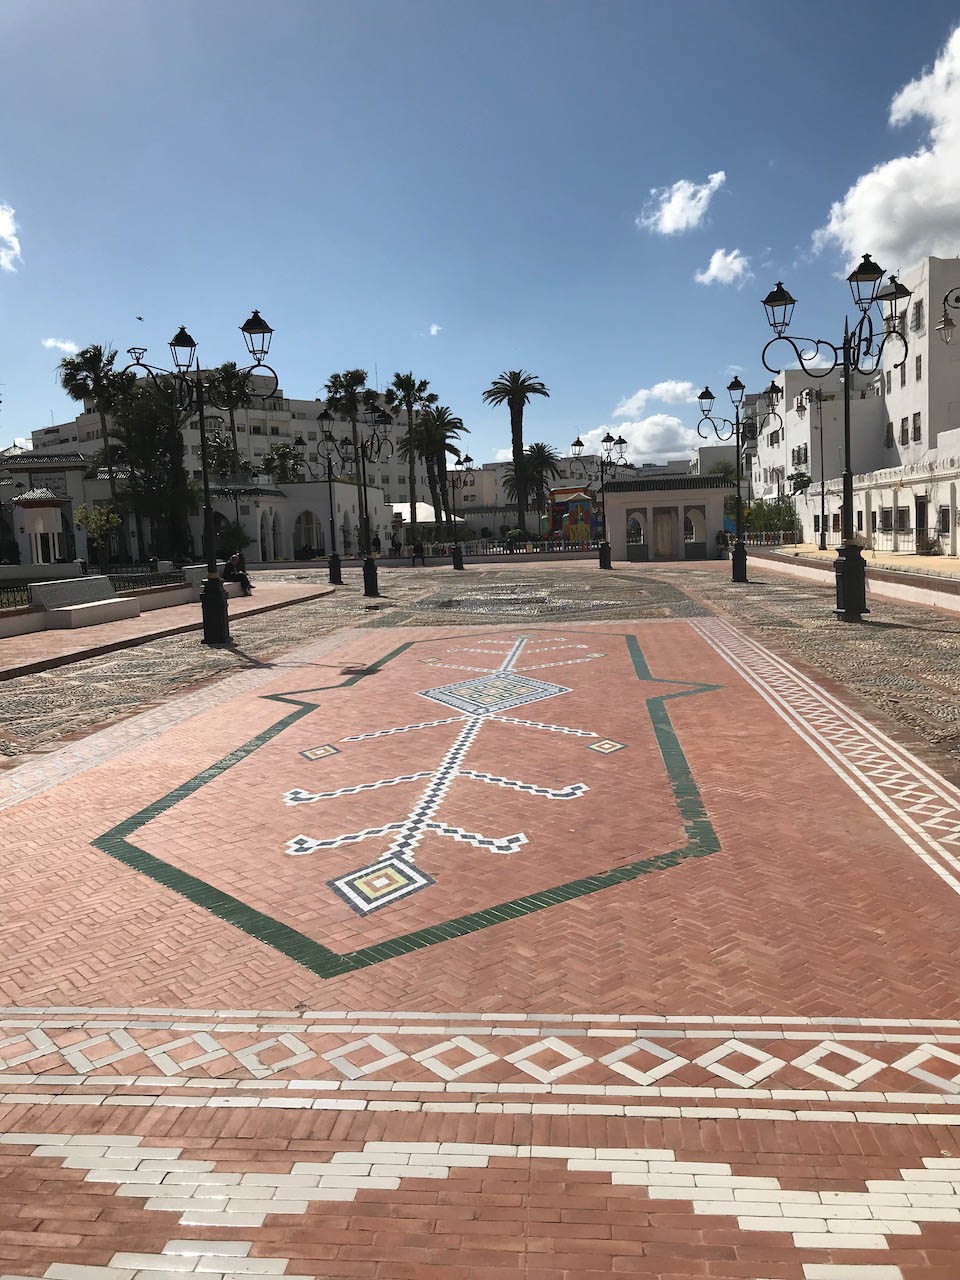 <p>View of the brick and tile mosaic paving the square</p>